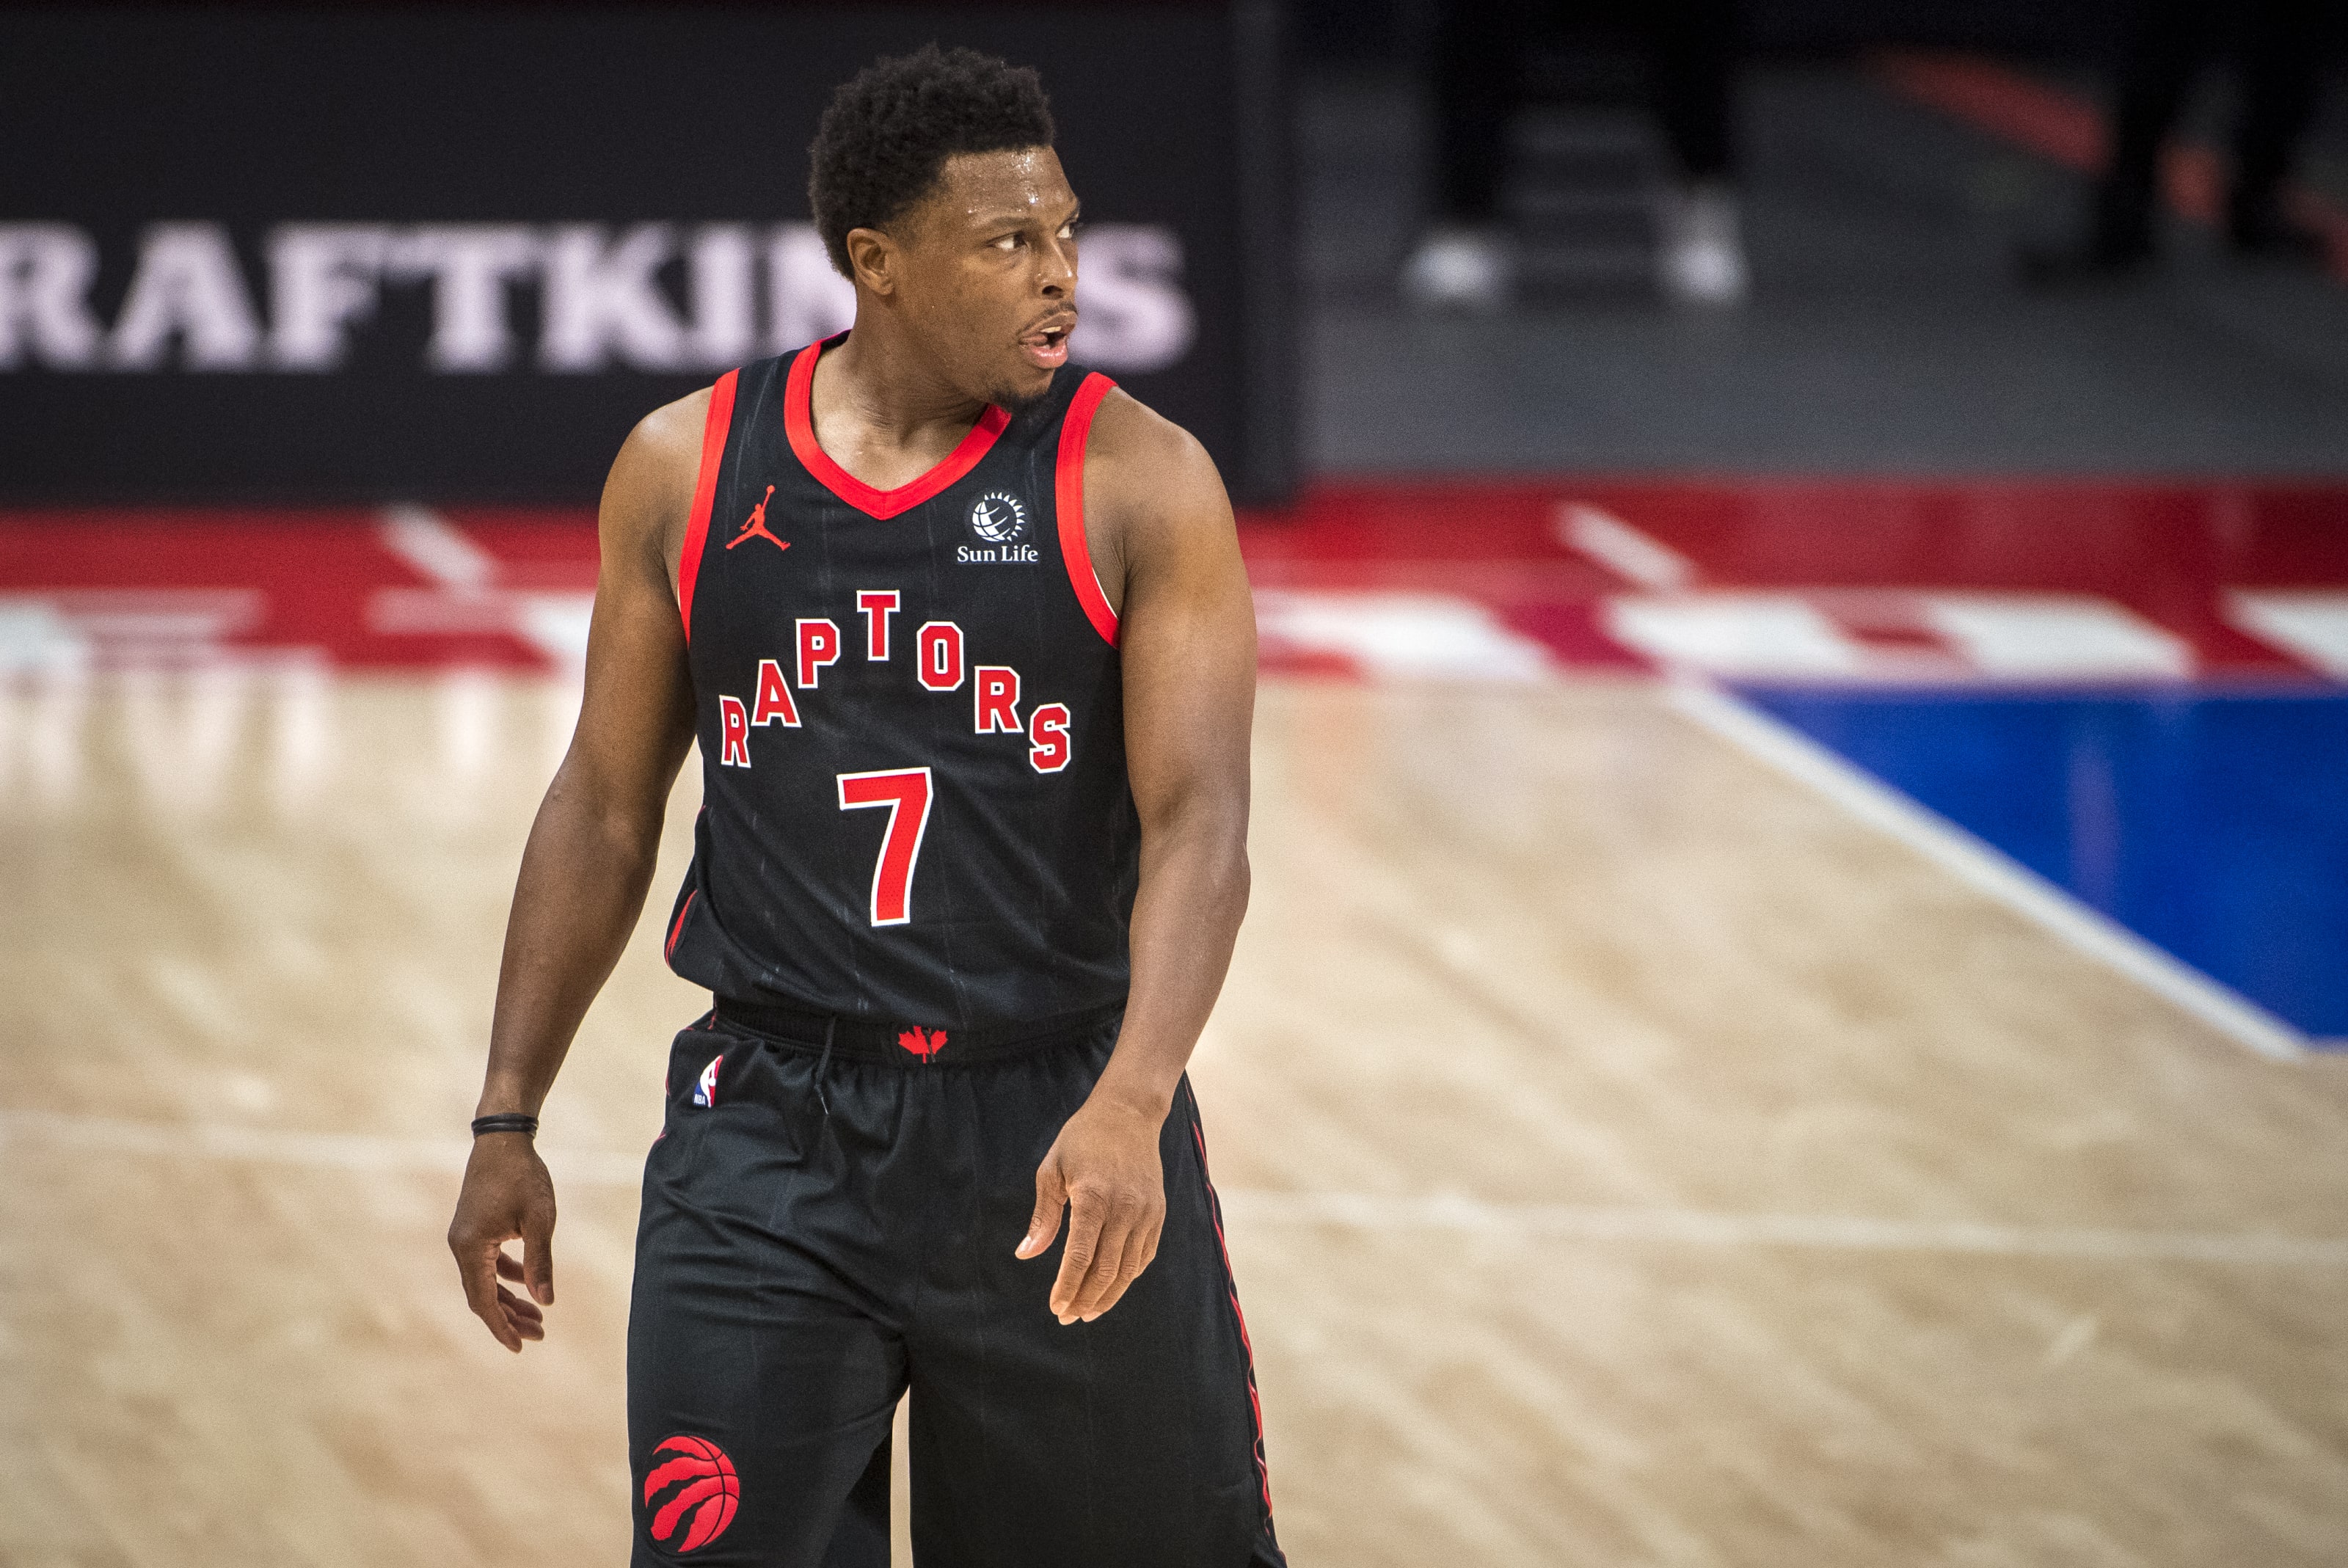 Miami Heat: Kyle Lowry signs with Heat on three-year deal